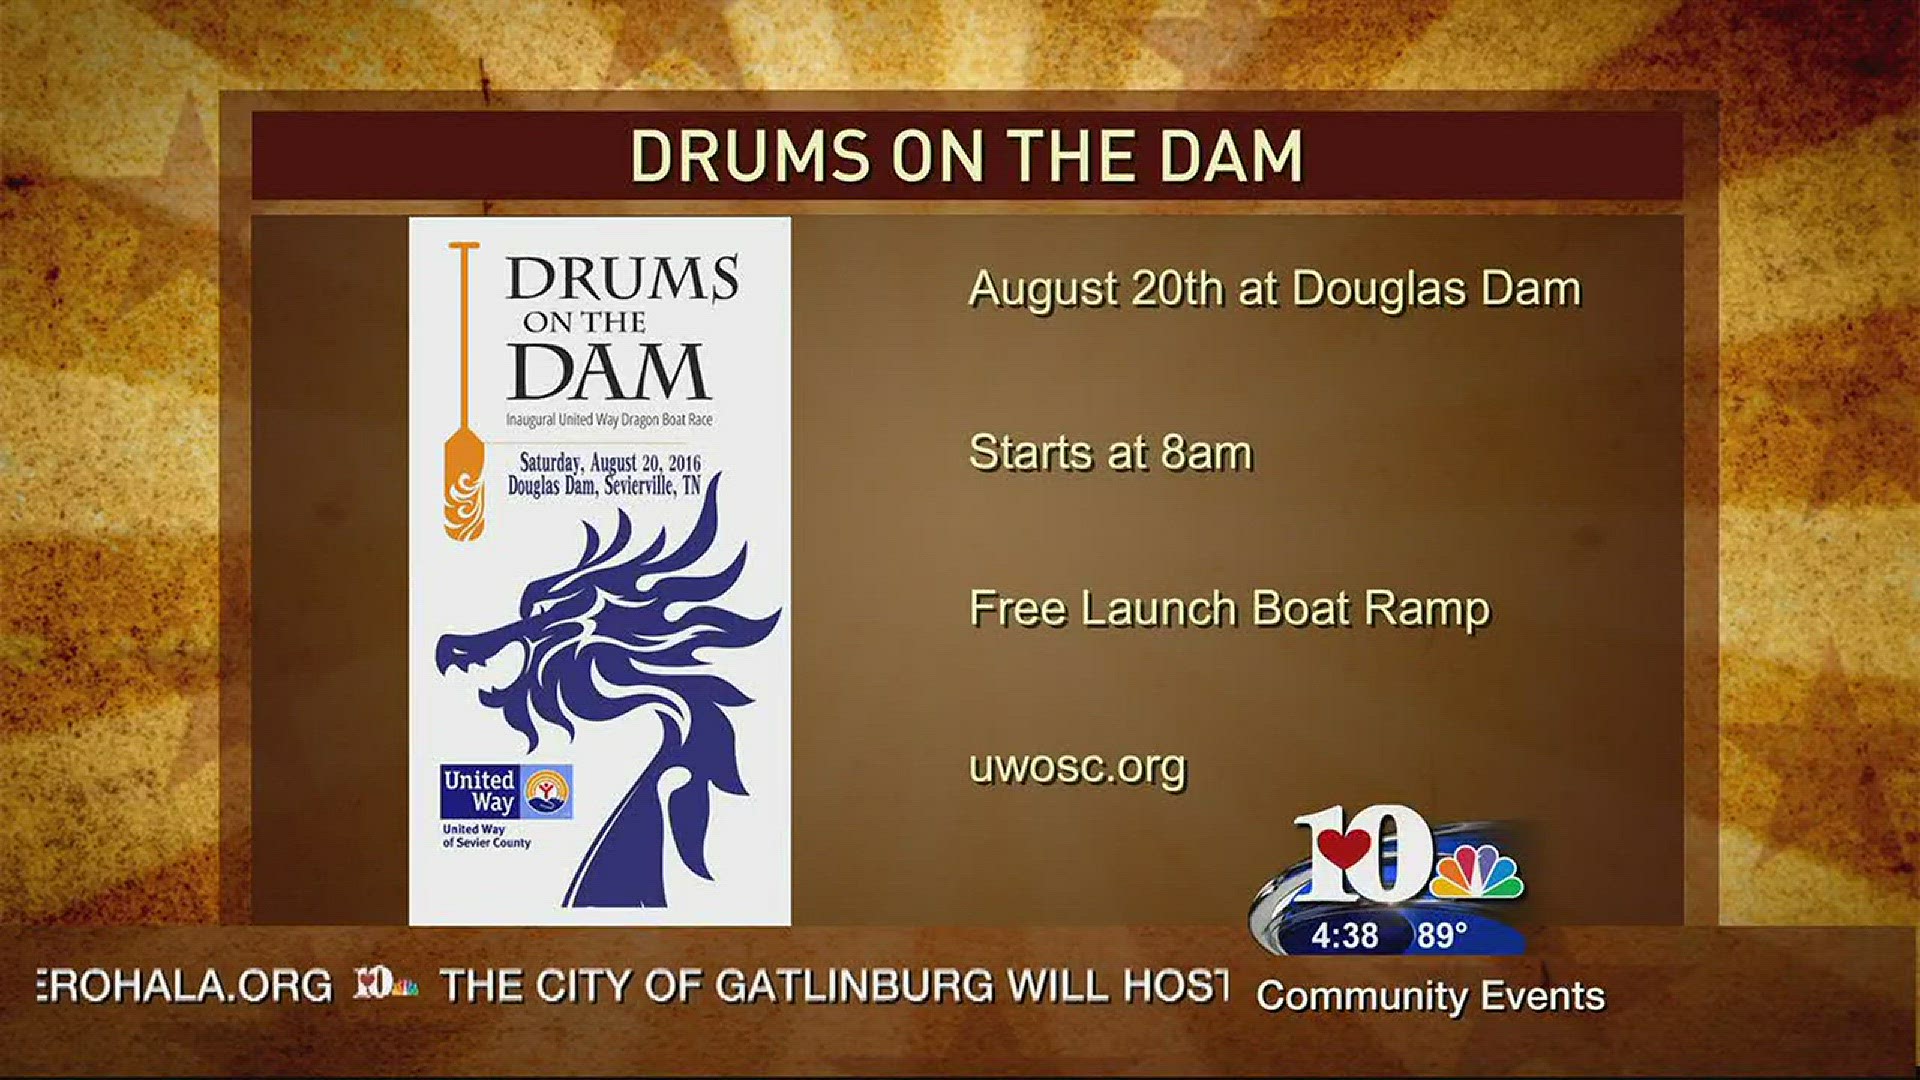 June 30, 2016Live at Five at 4The United way of Sevier County will host the first ever Drums on the Dam --Dragon Boat Races on Douglas Dam, August 20  beginning at 8am.At the Douglas Dam free launch boat rampSign up at uwosc.org